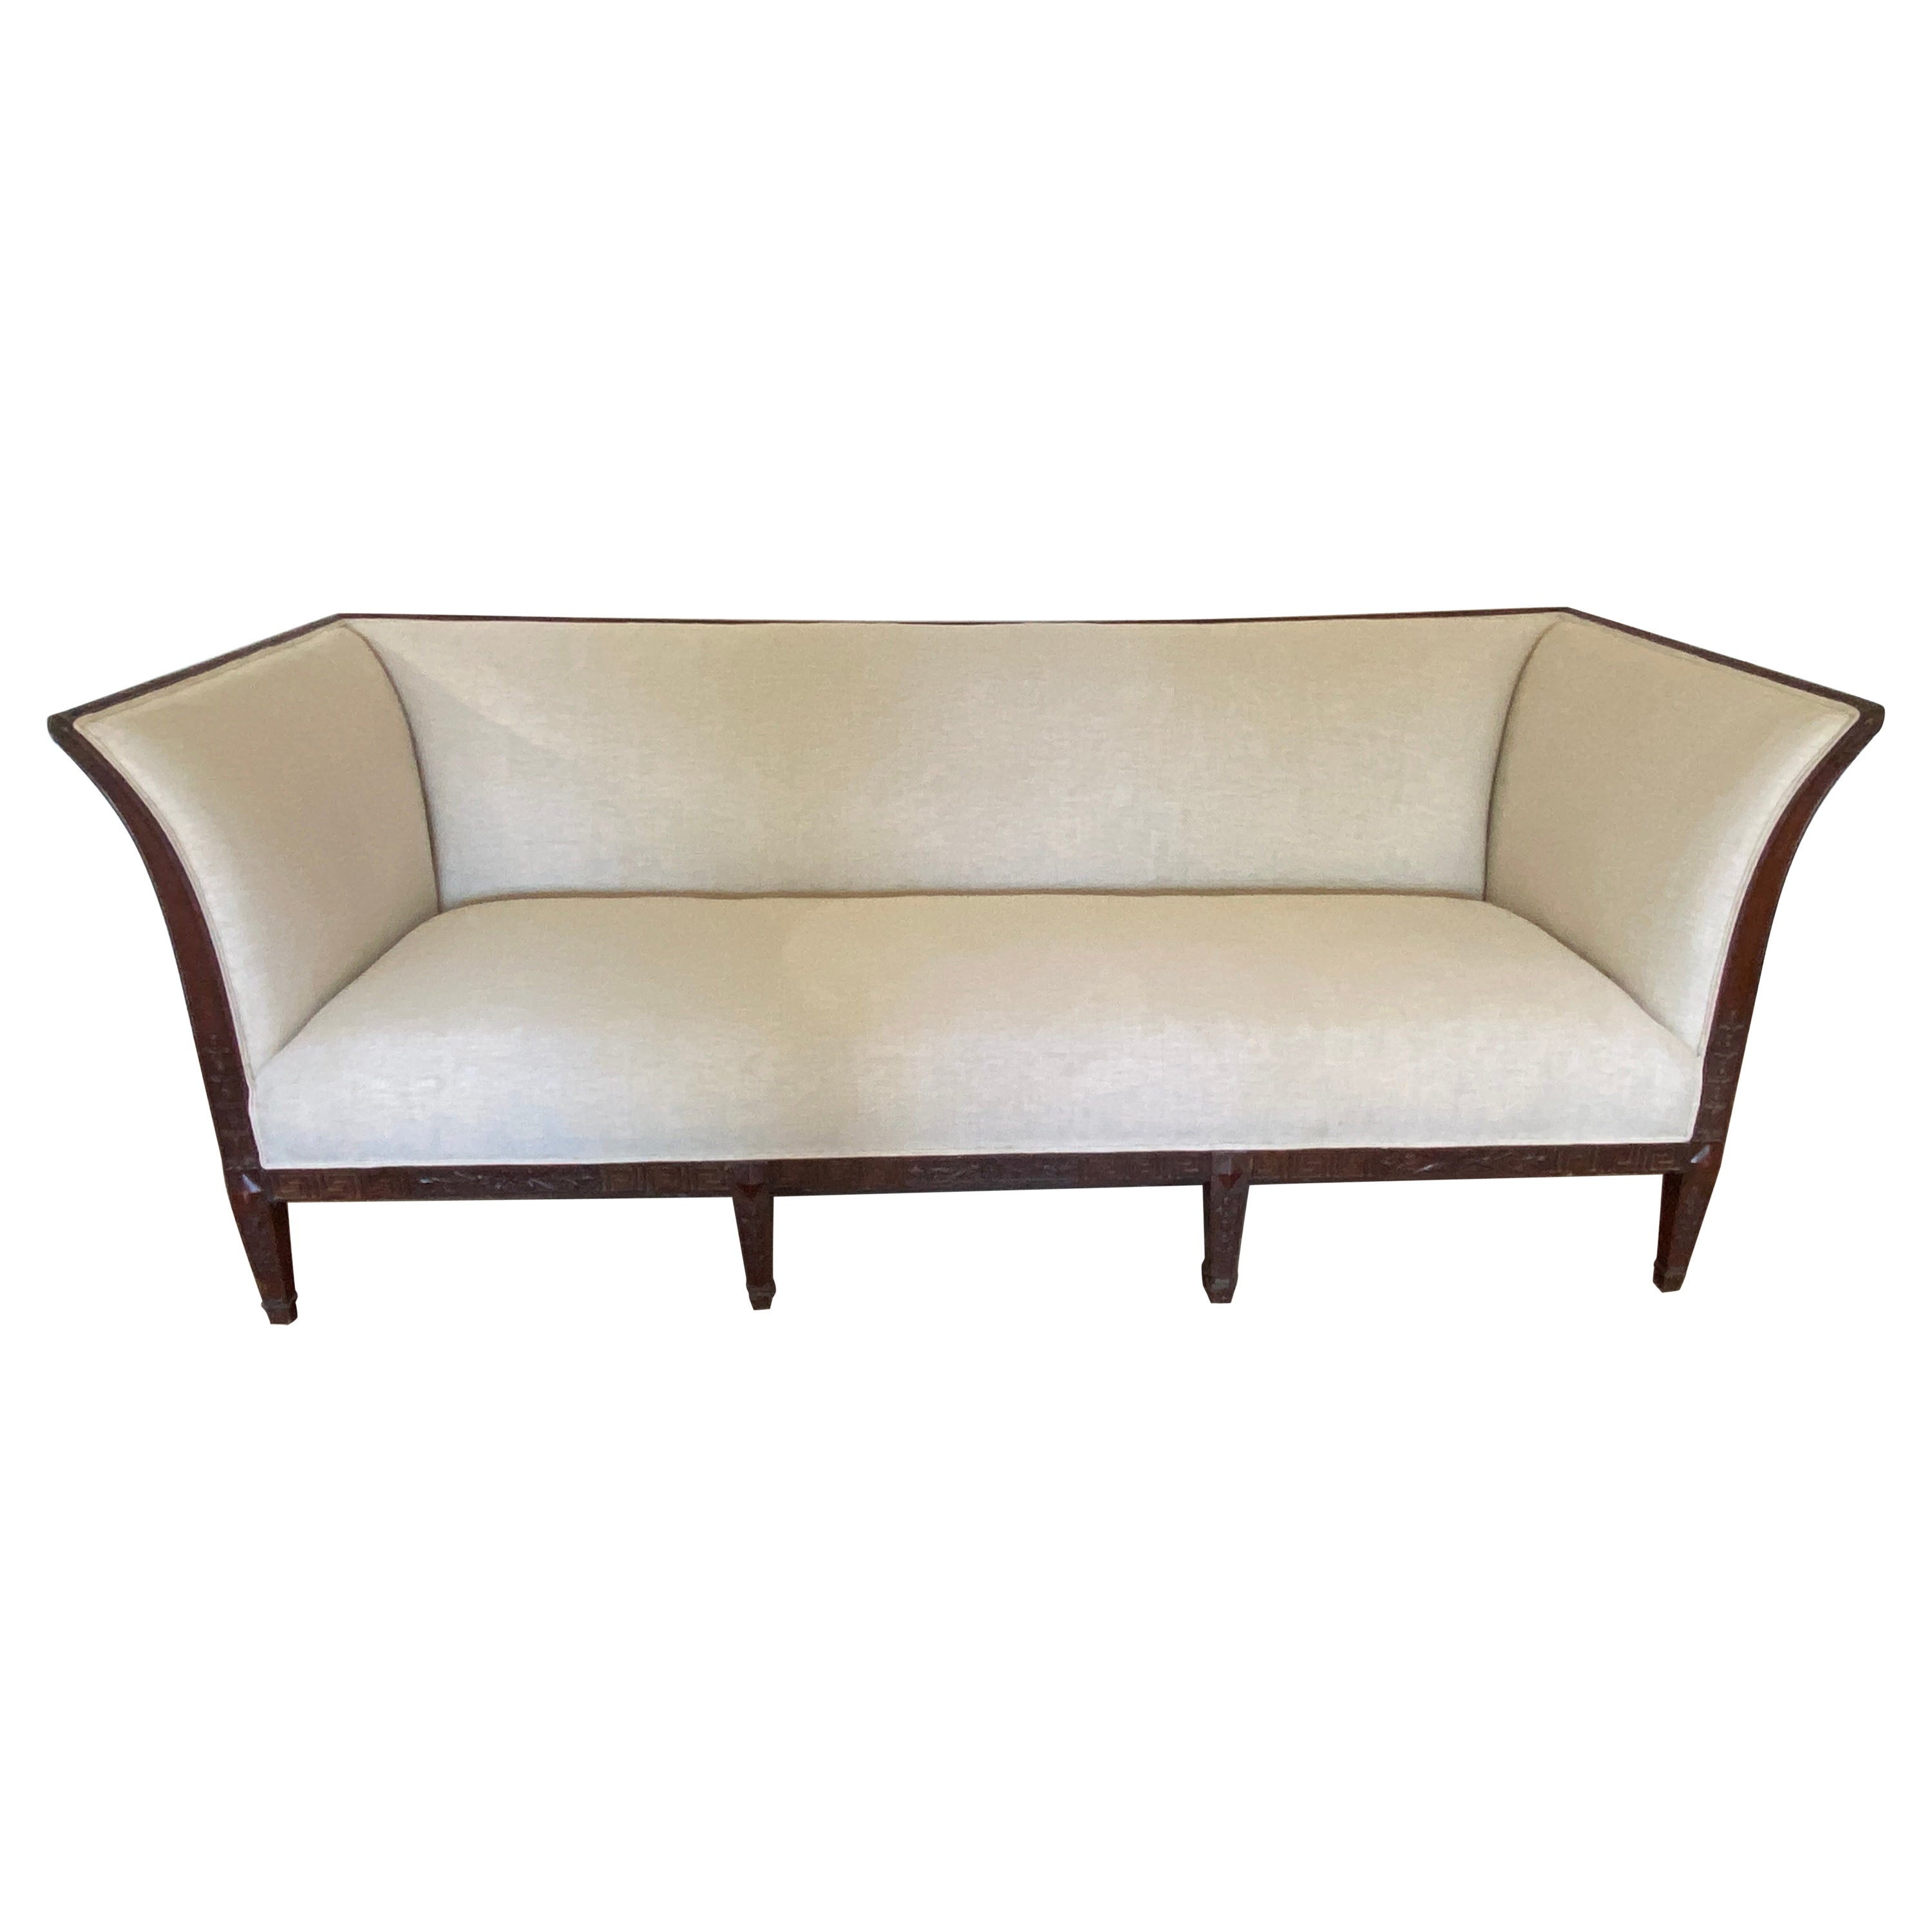 Early 20th C. Chippendale Style Sofa